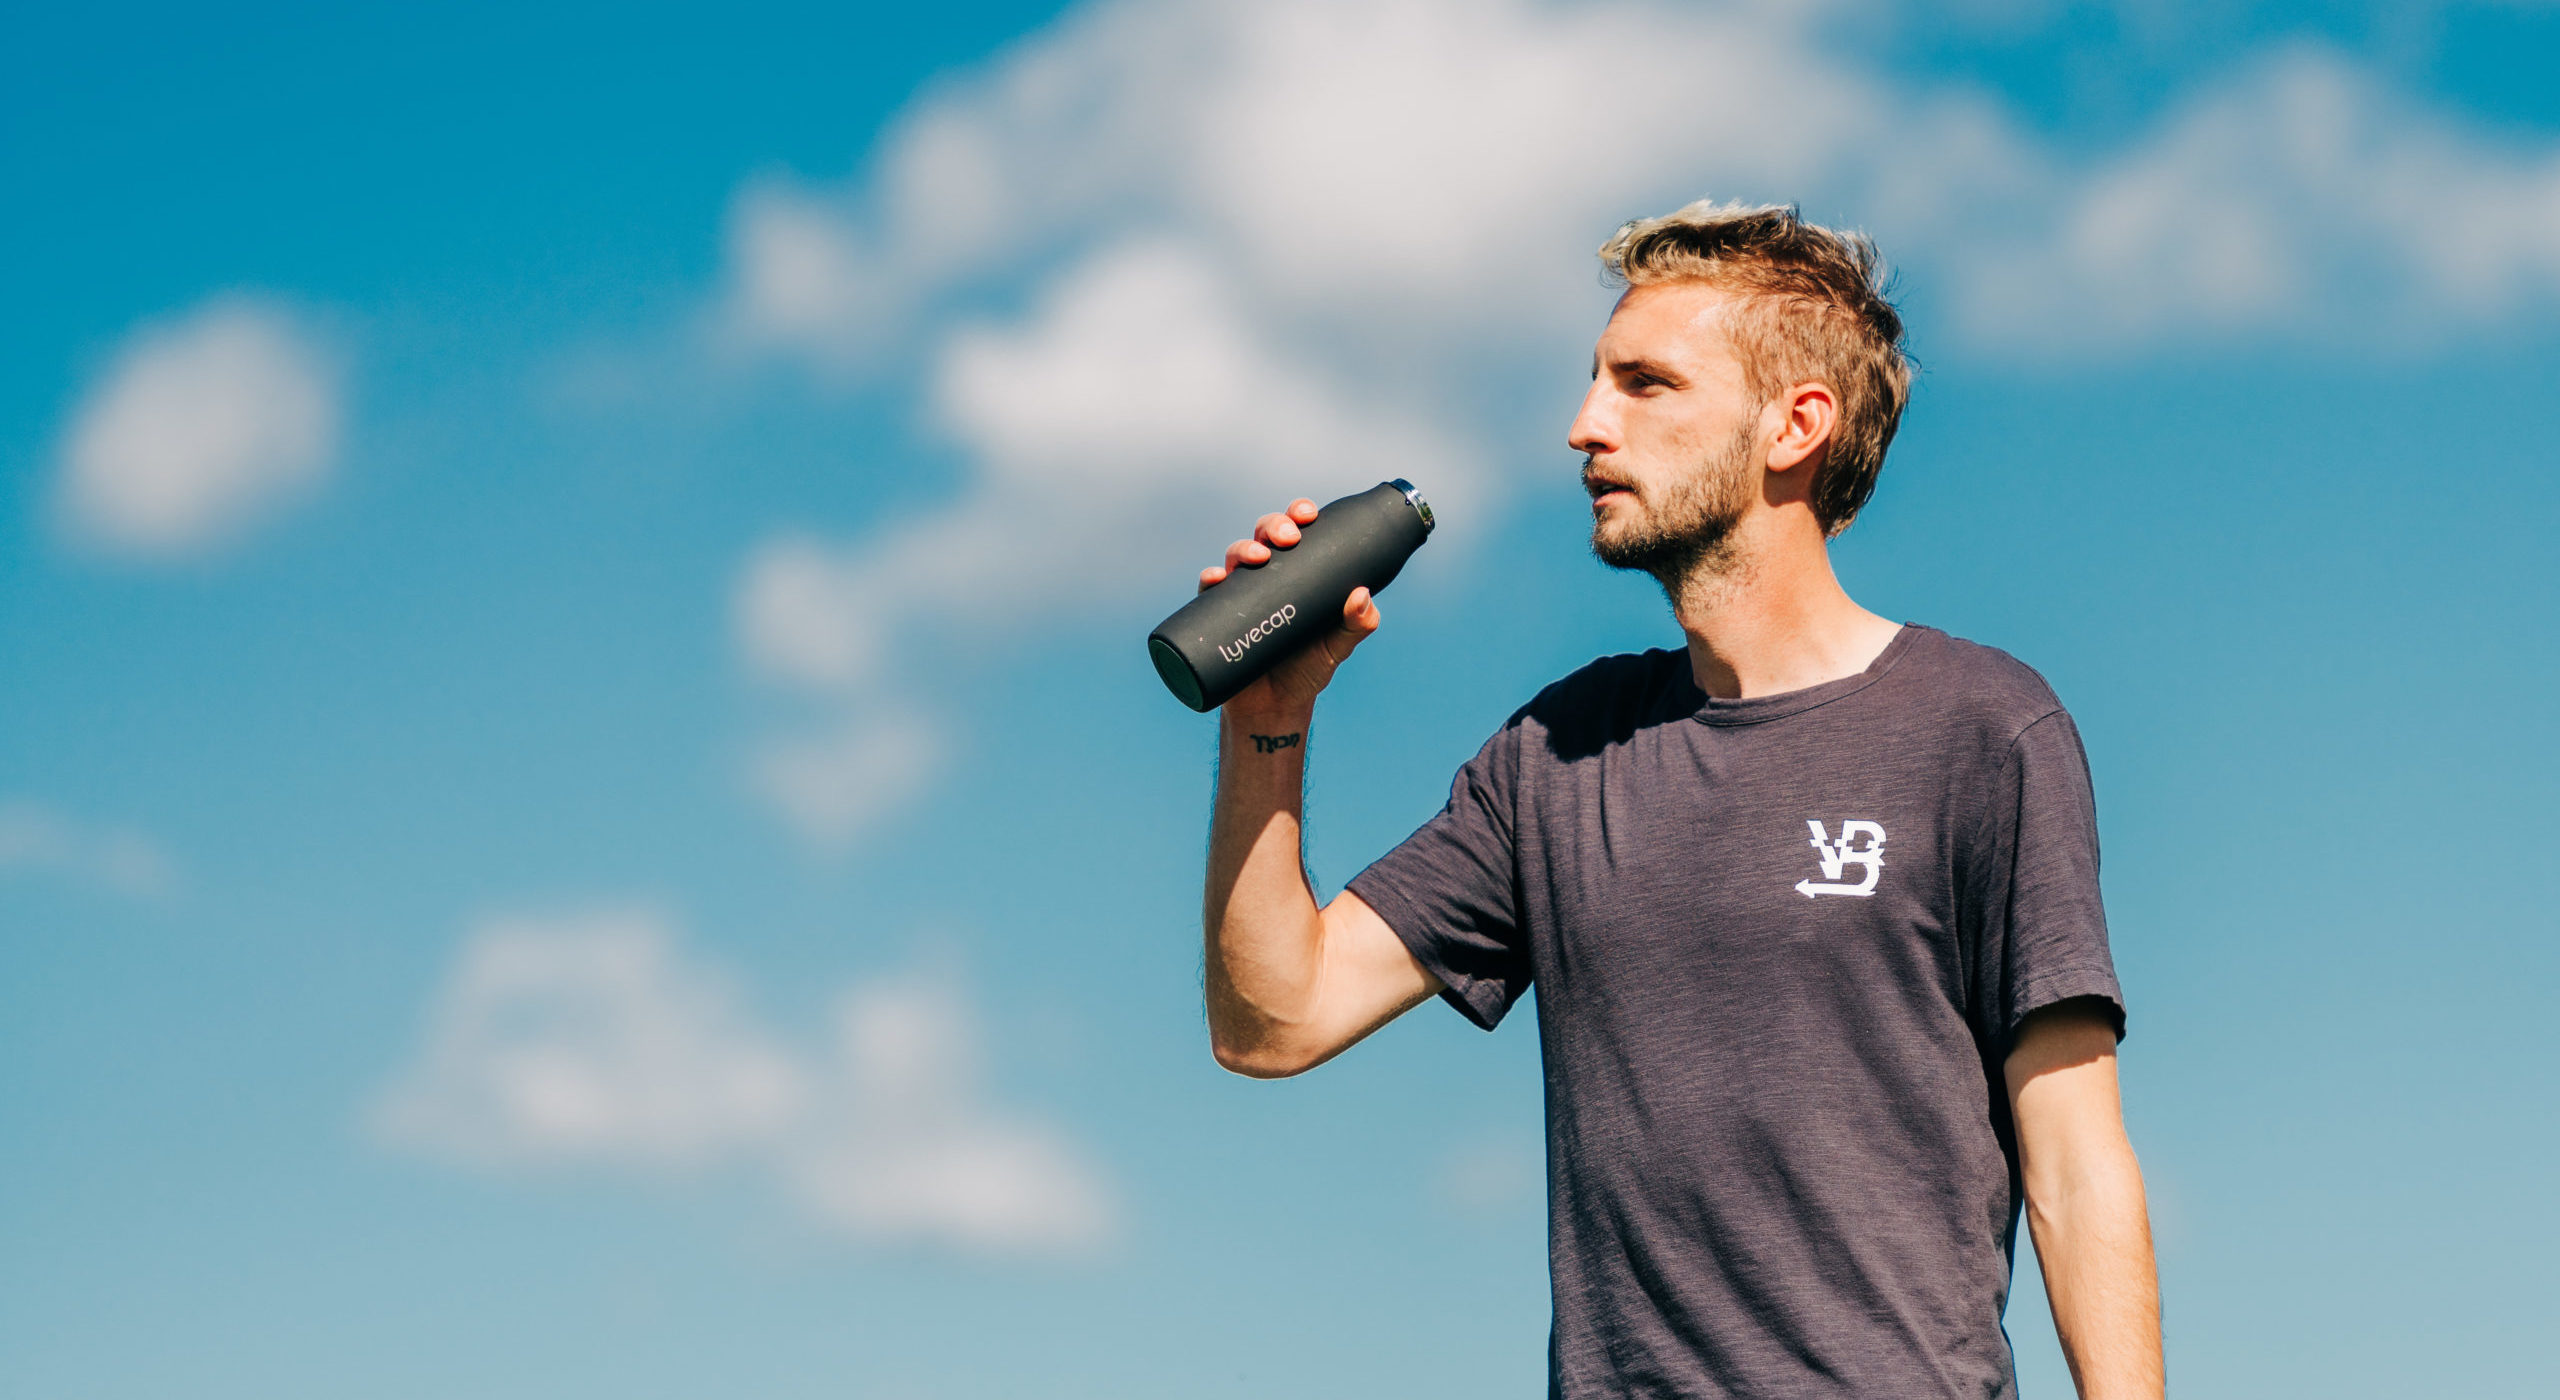 color image of pro soccer player Villyan Bijev holding a LYVECAP probiotic water bottle against a blue sky with white clouds